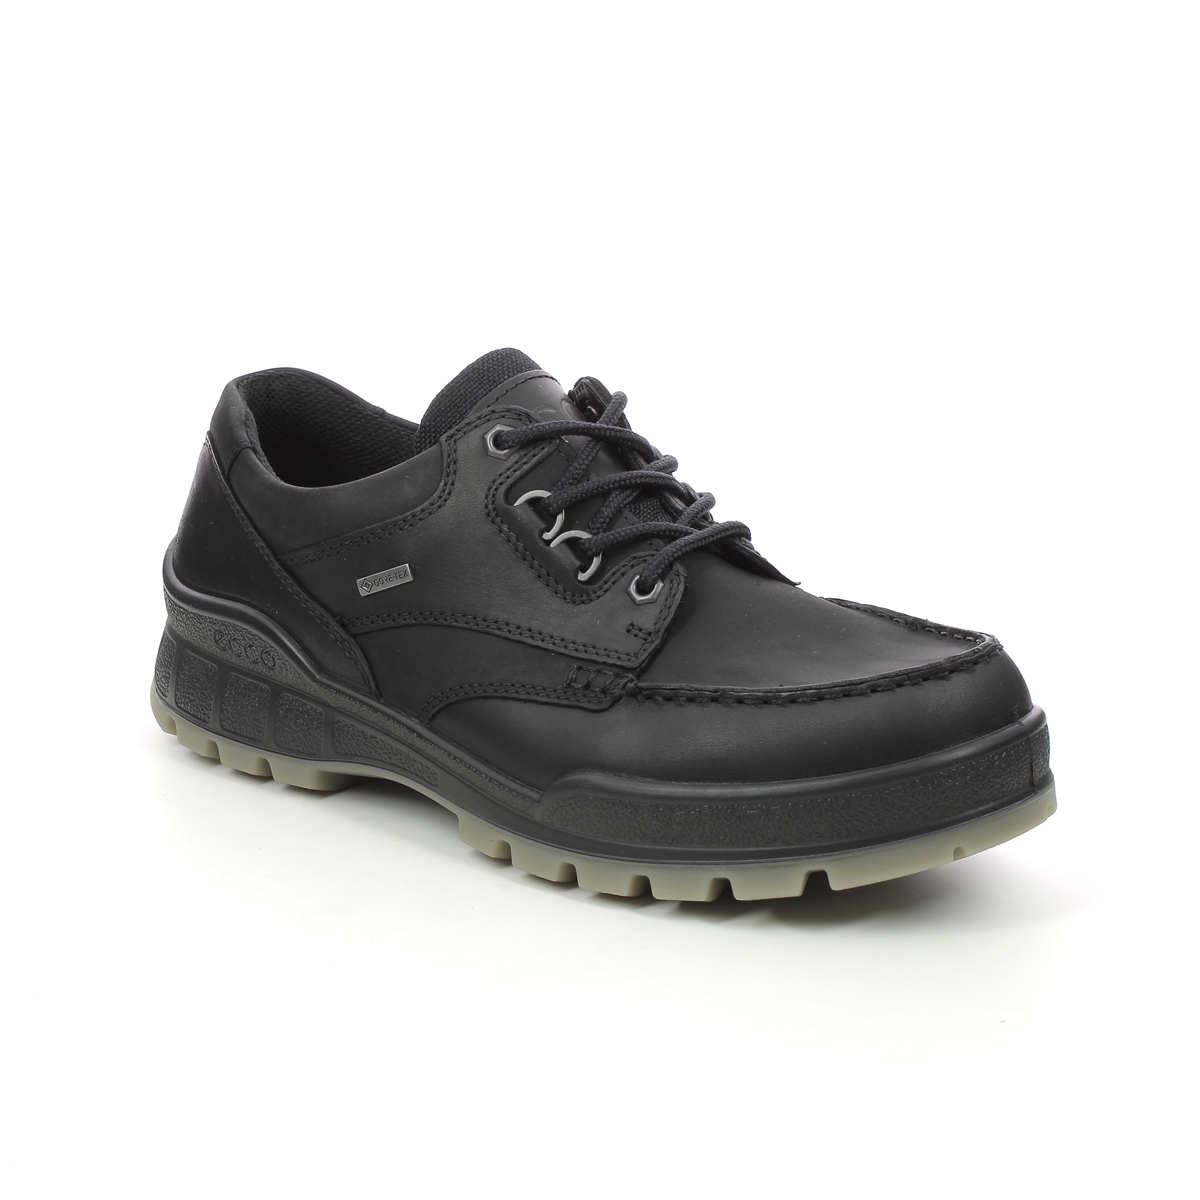 Ecco Track 25 Gore Black Leather Mens Walking Shoes 831714-51052 In Size 42 In Plain Black Leather